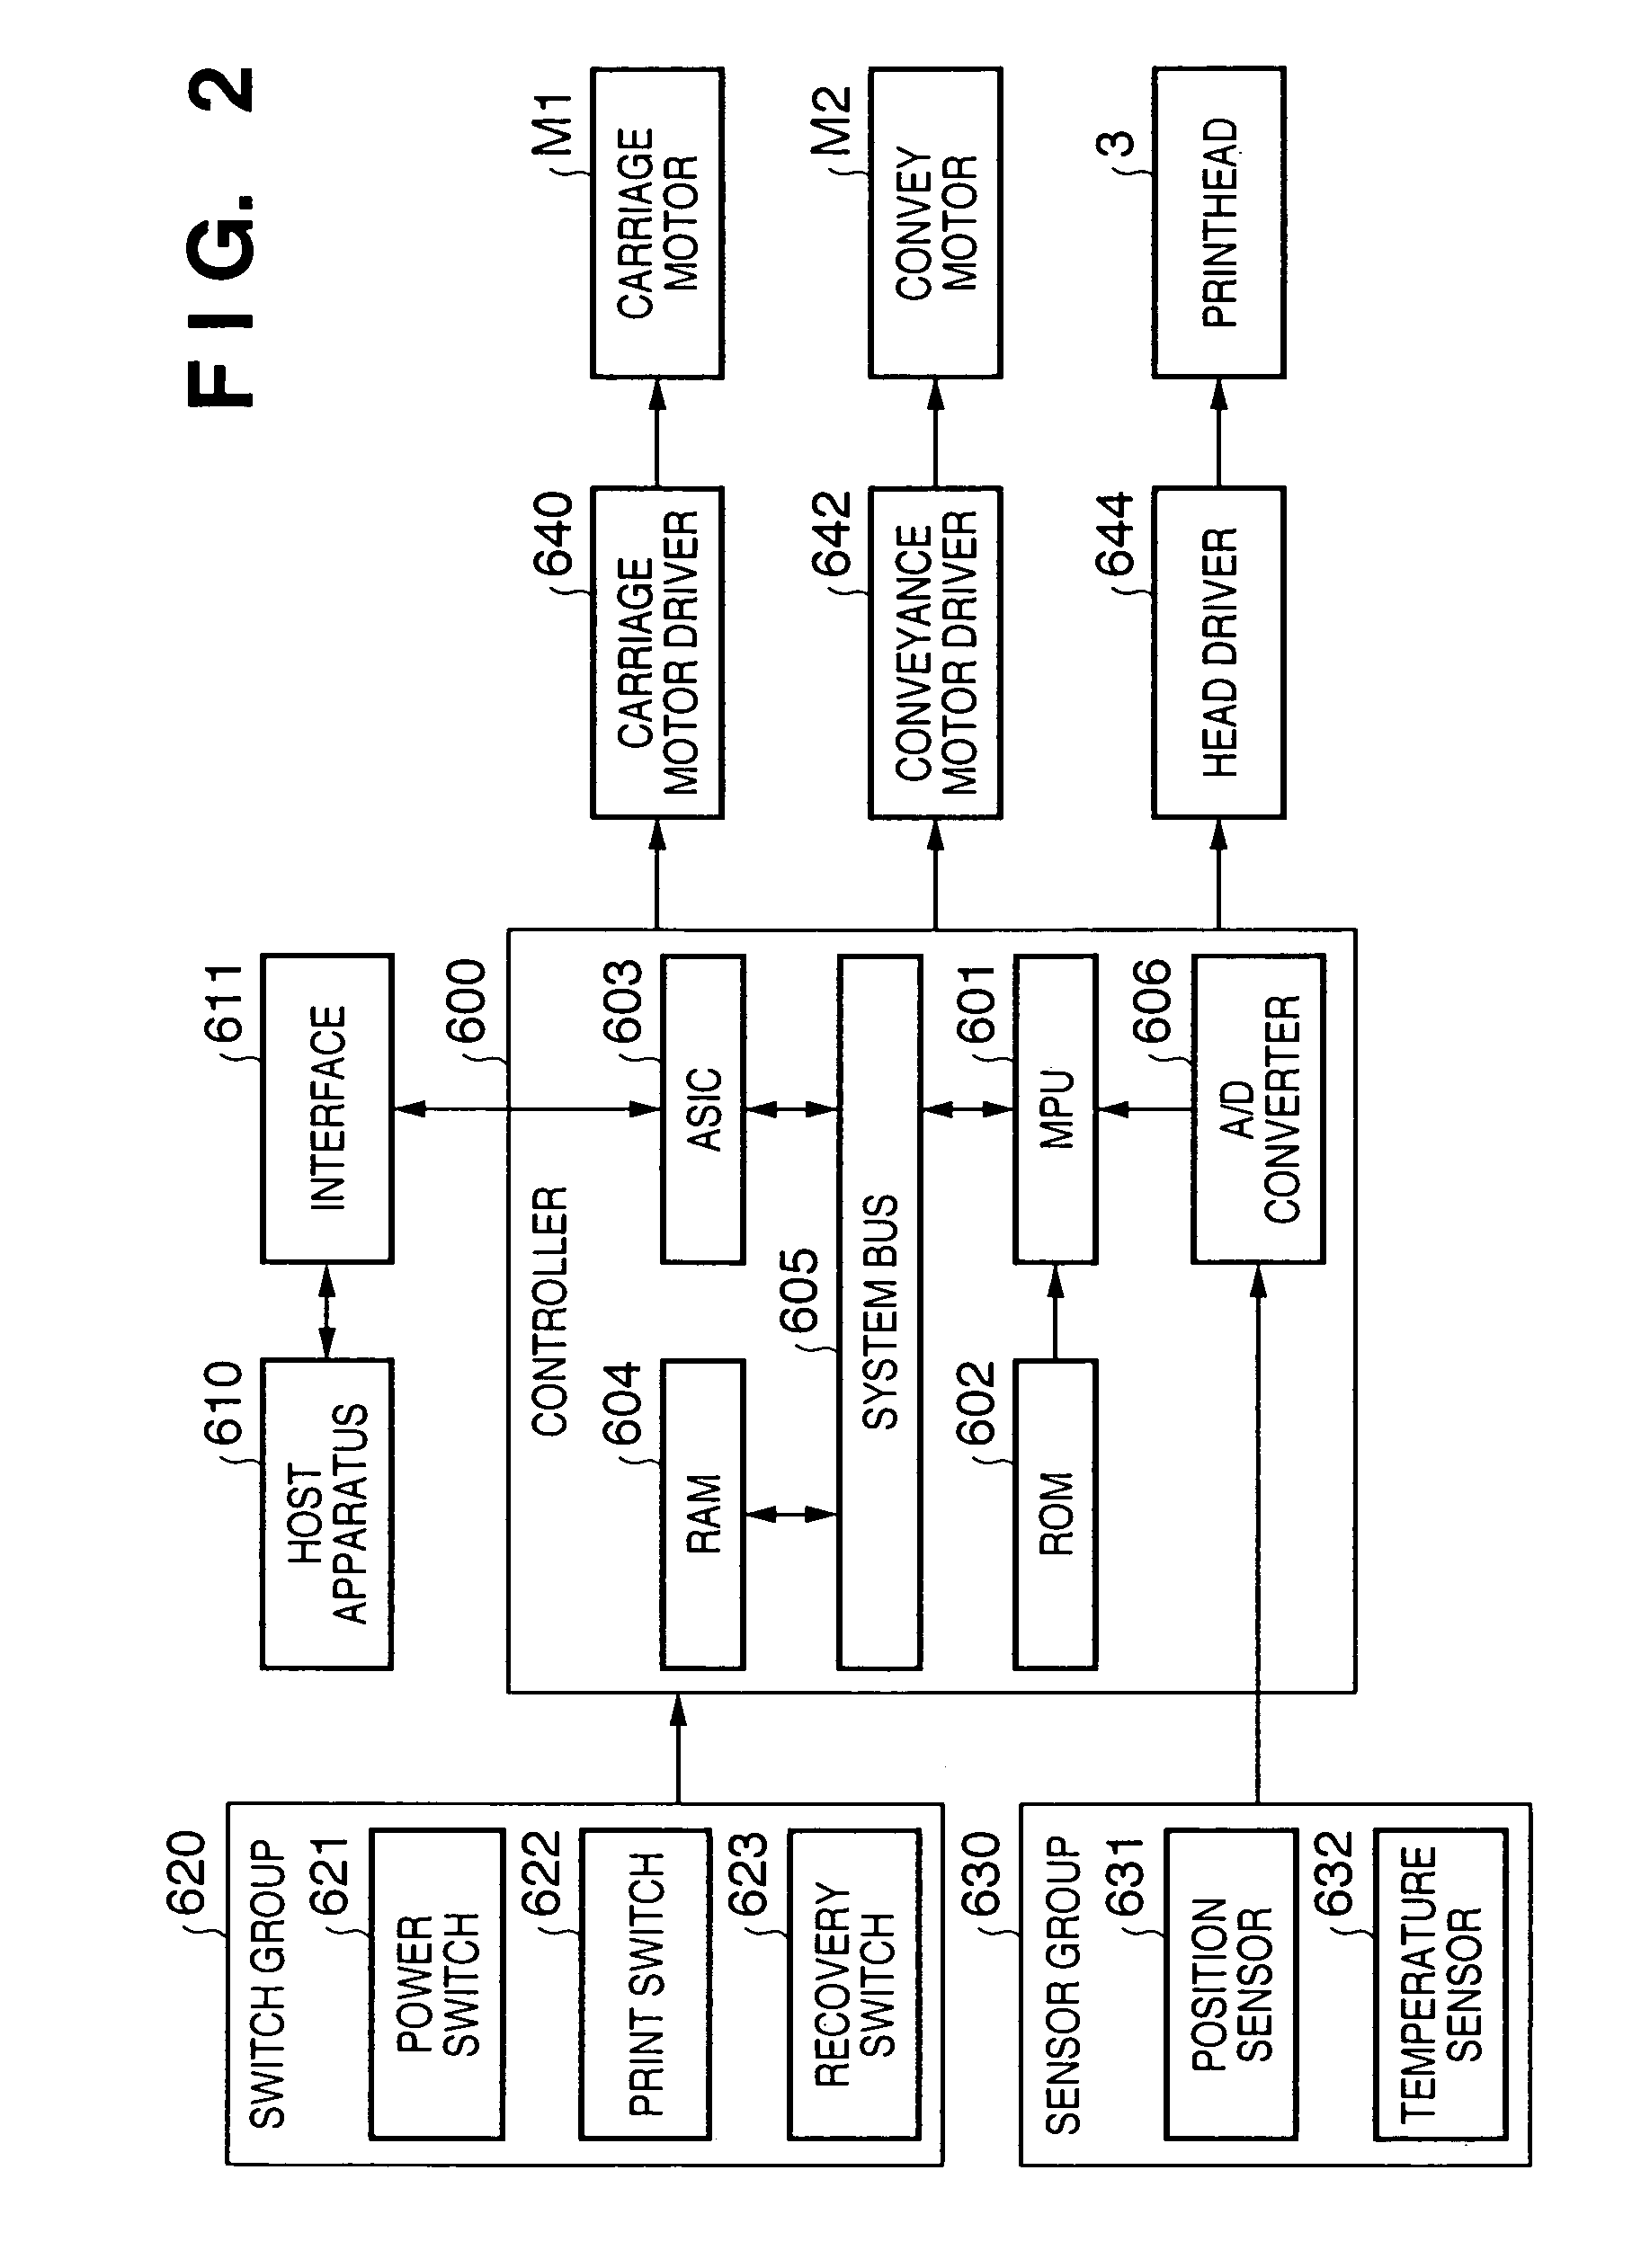 Method of driving a printhead using a constant current and operating MOS transistor in saturation region